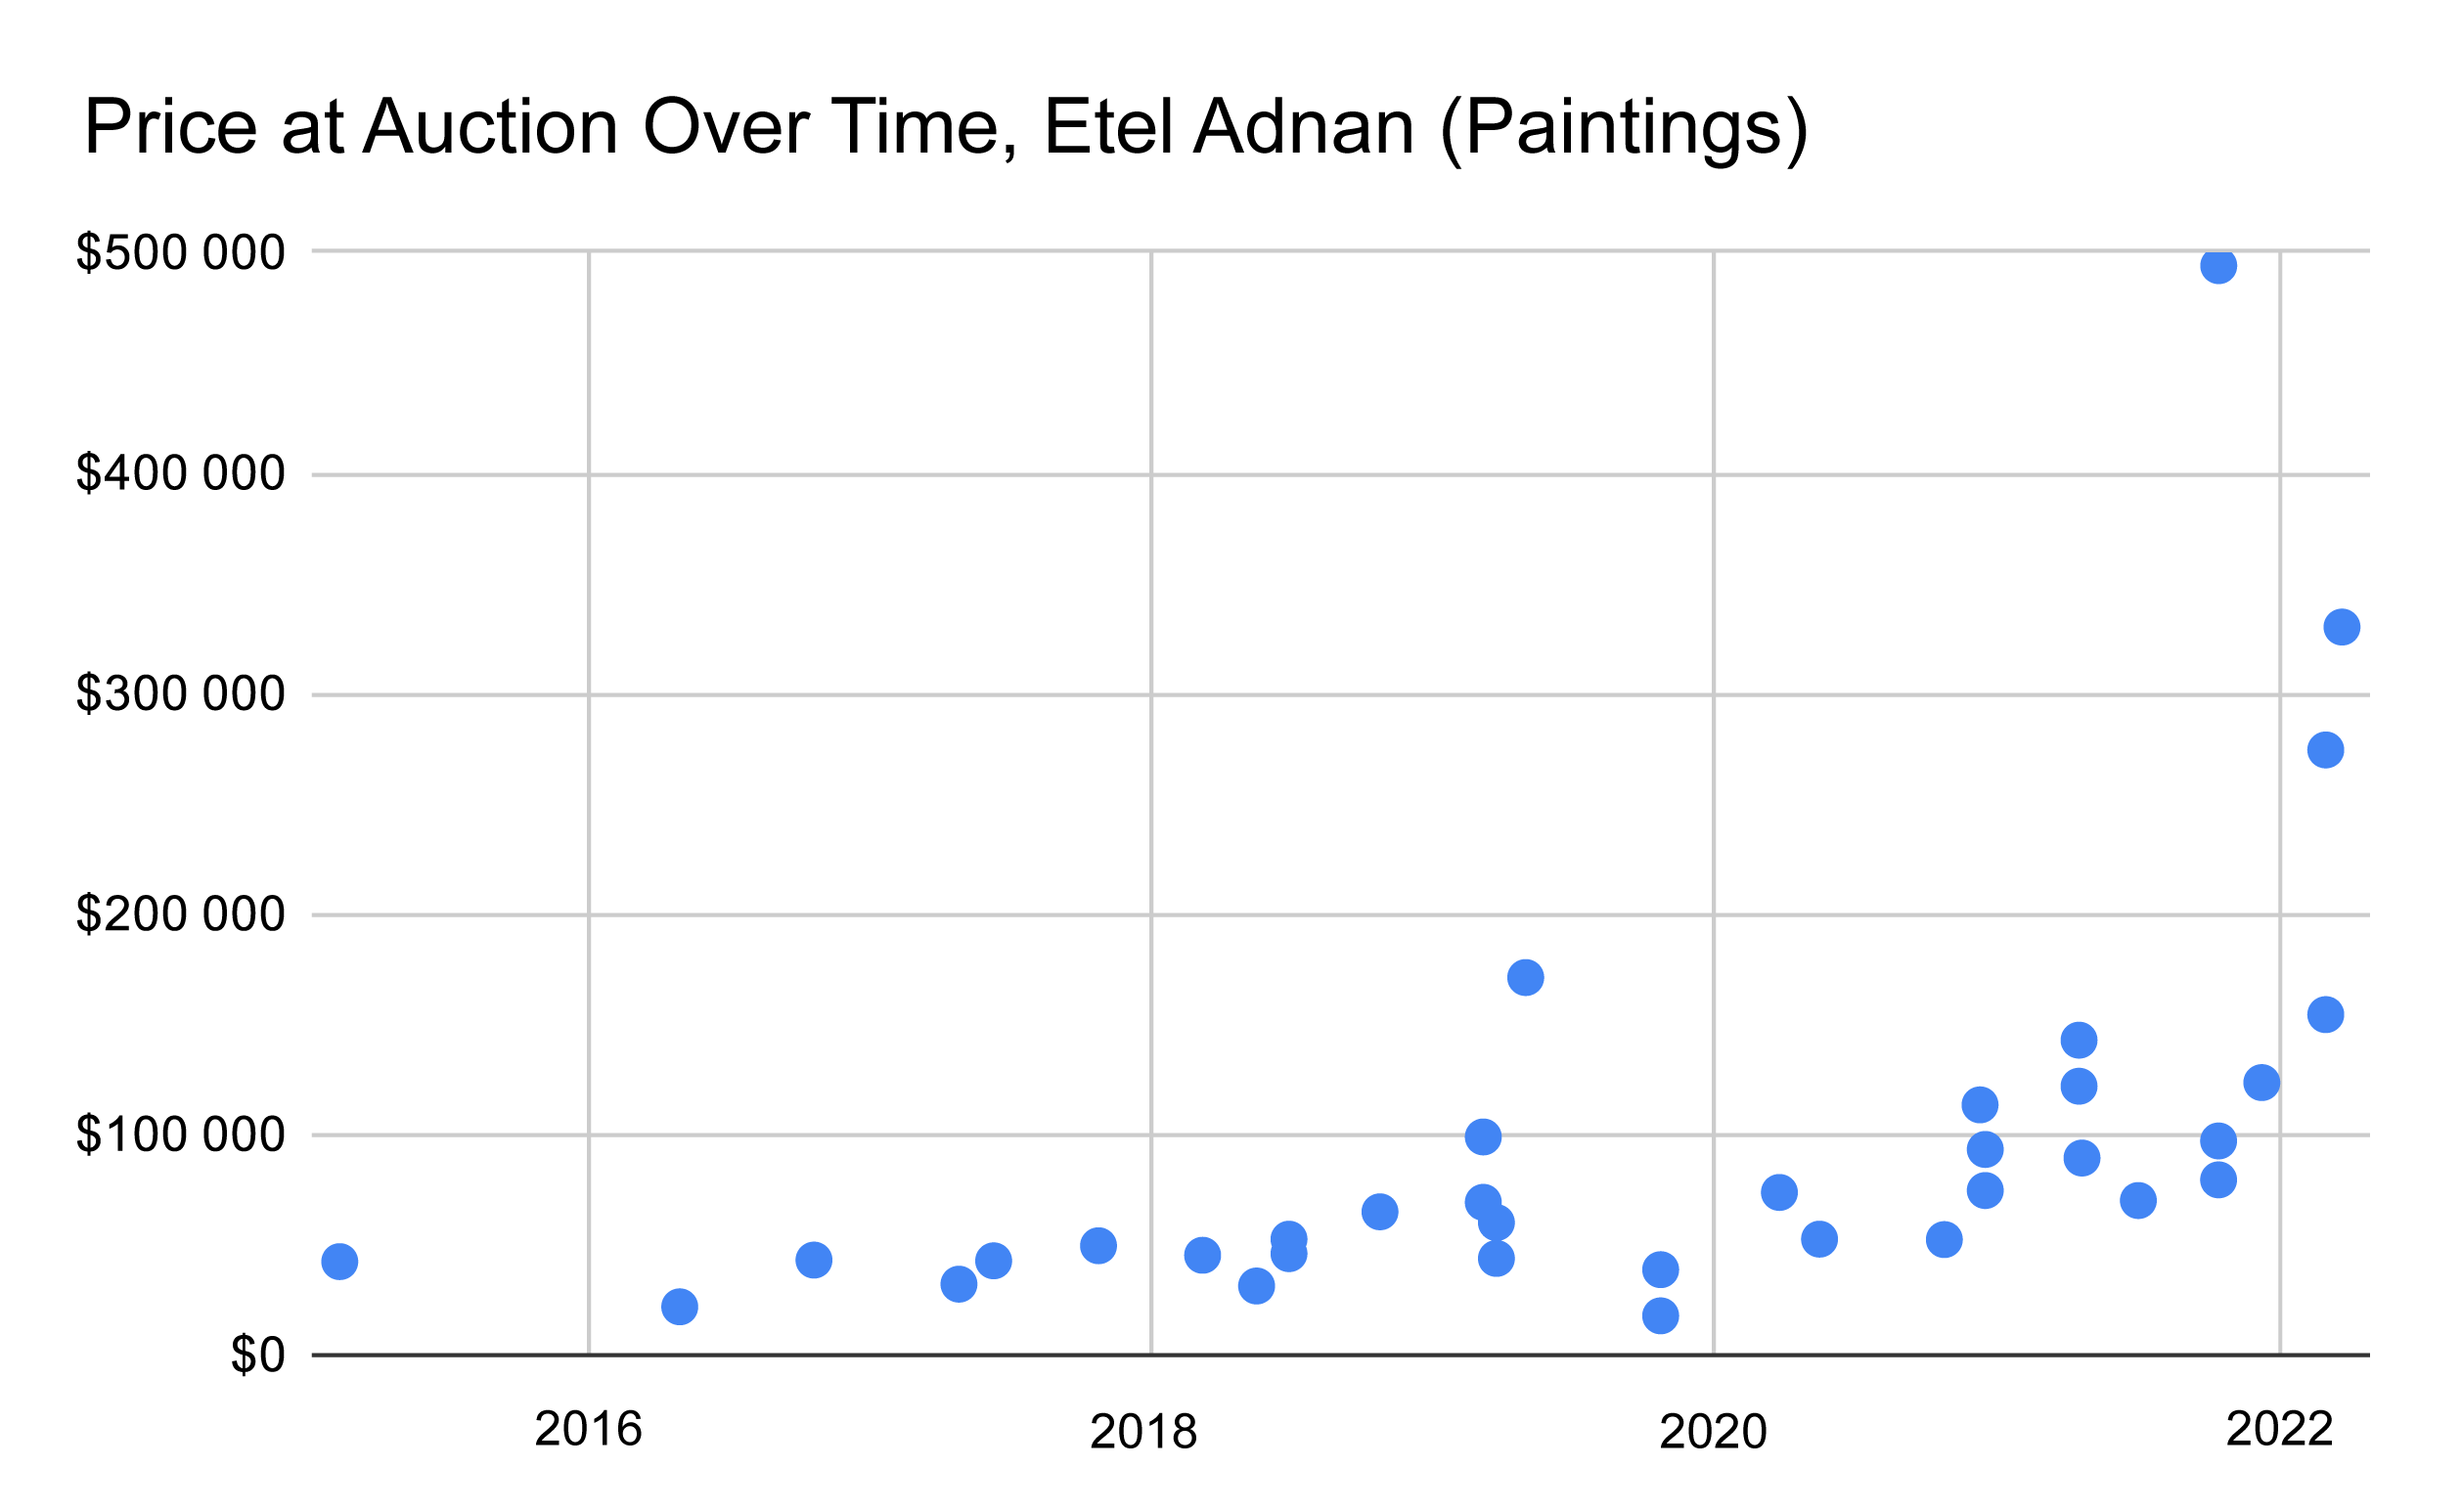 Etel Adnan paintings at auction